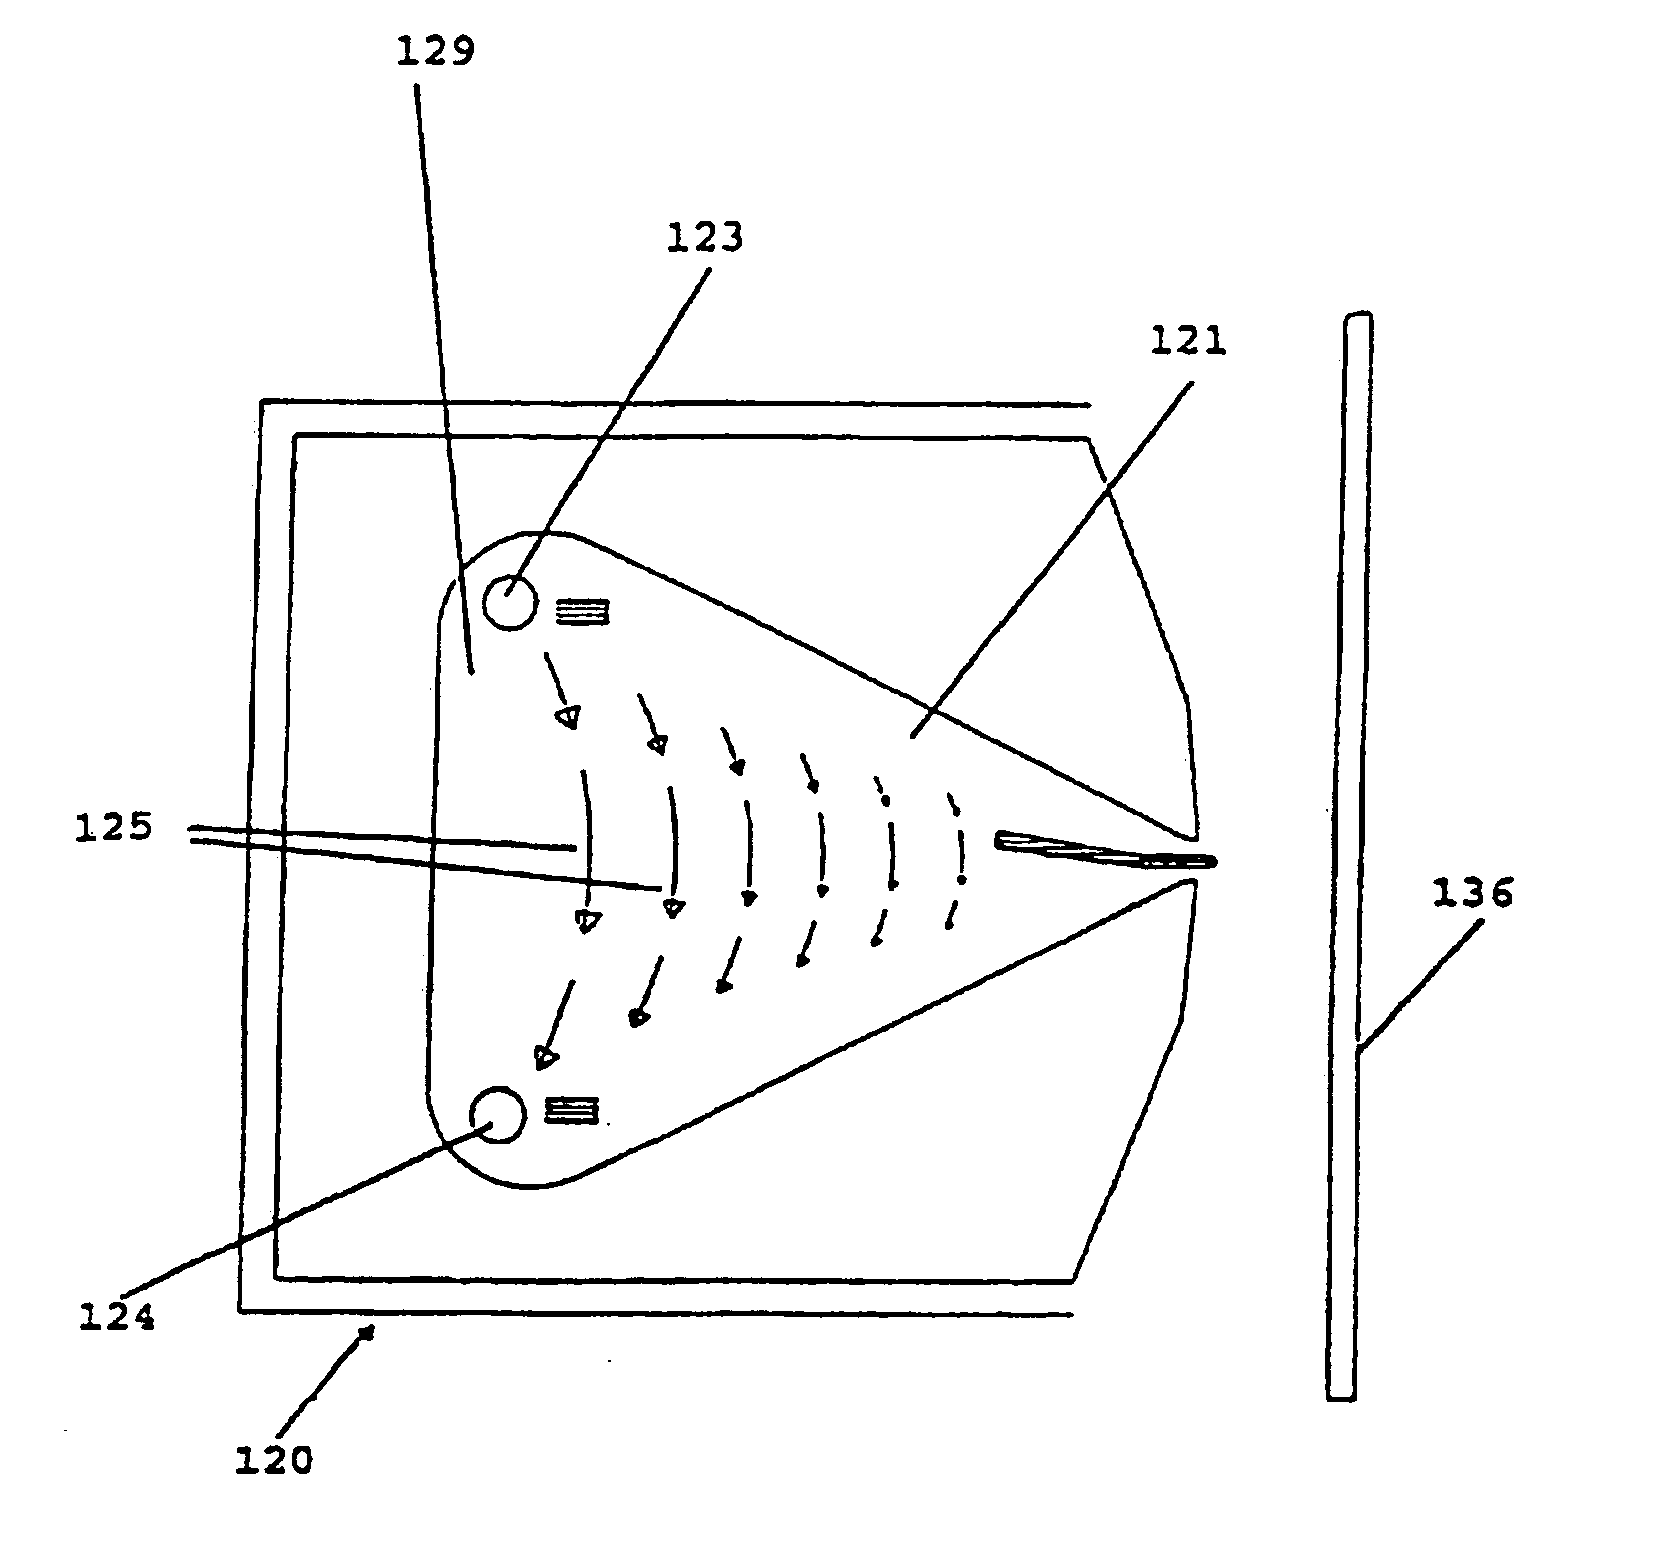 Ink-jet formation of flexographic printing plates